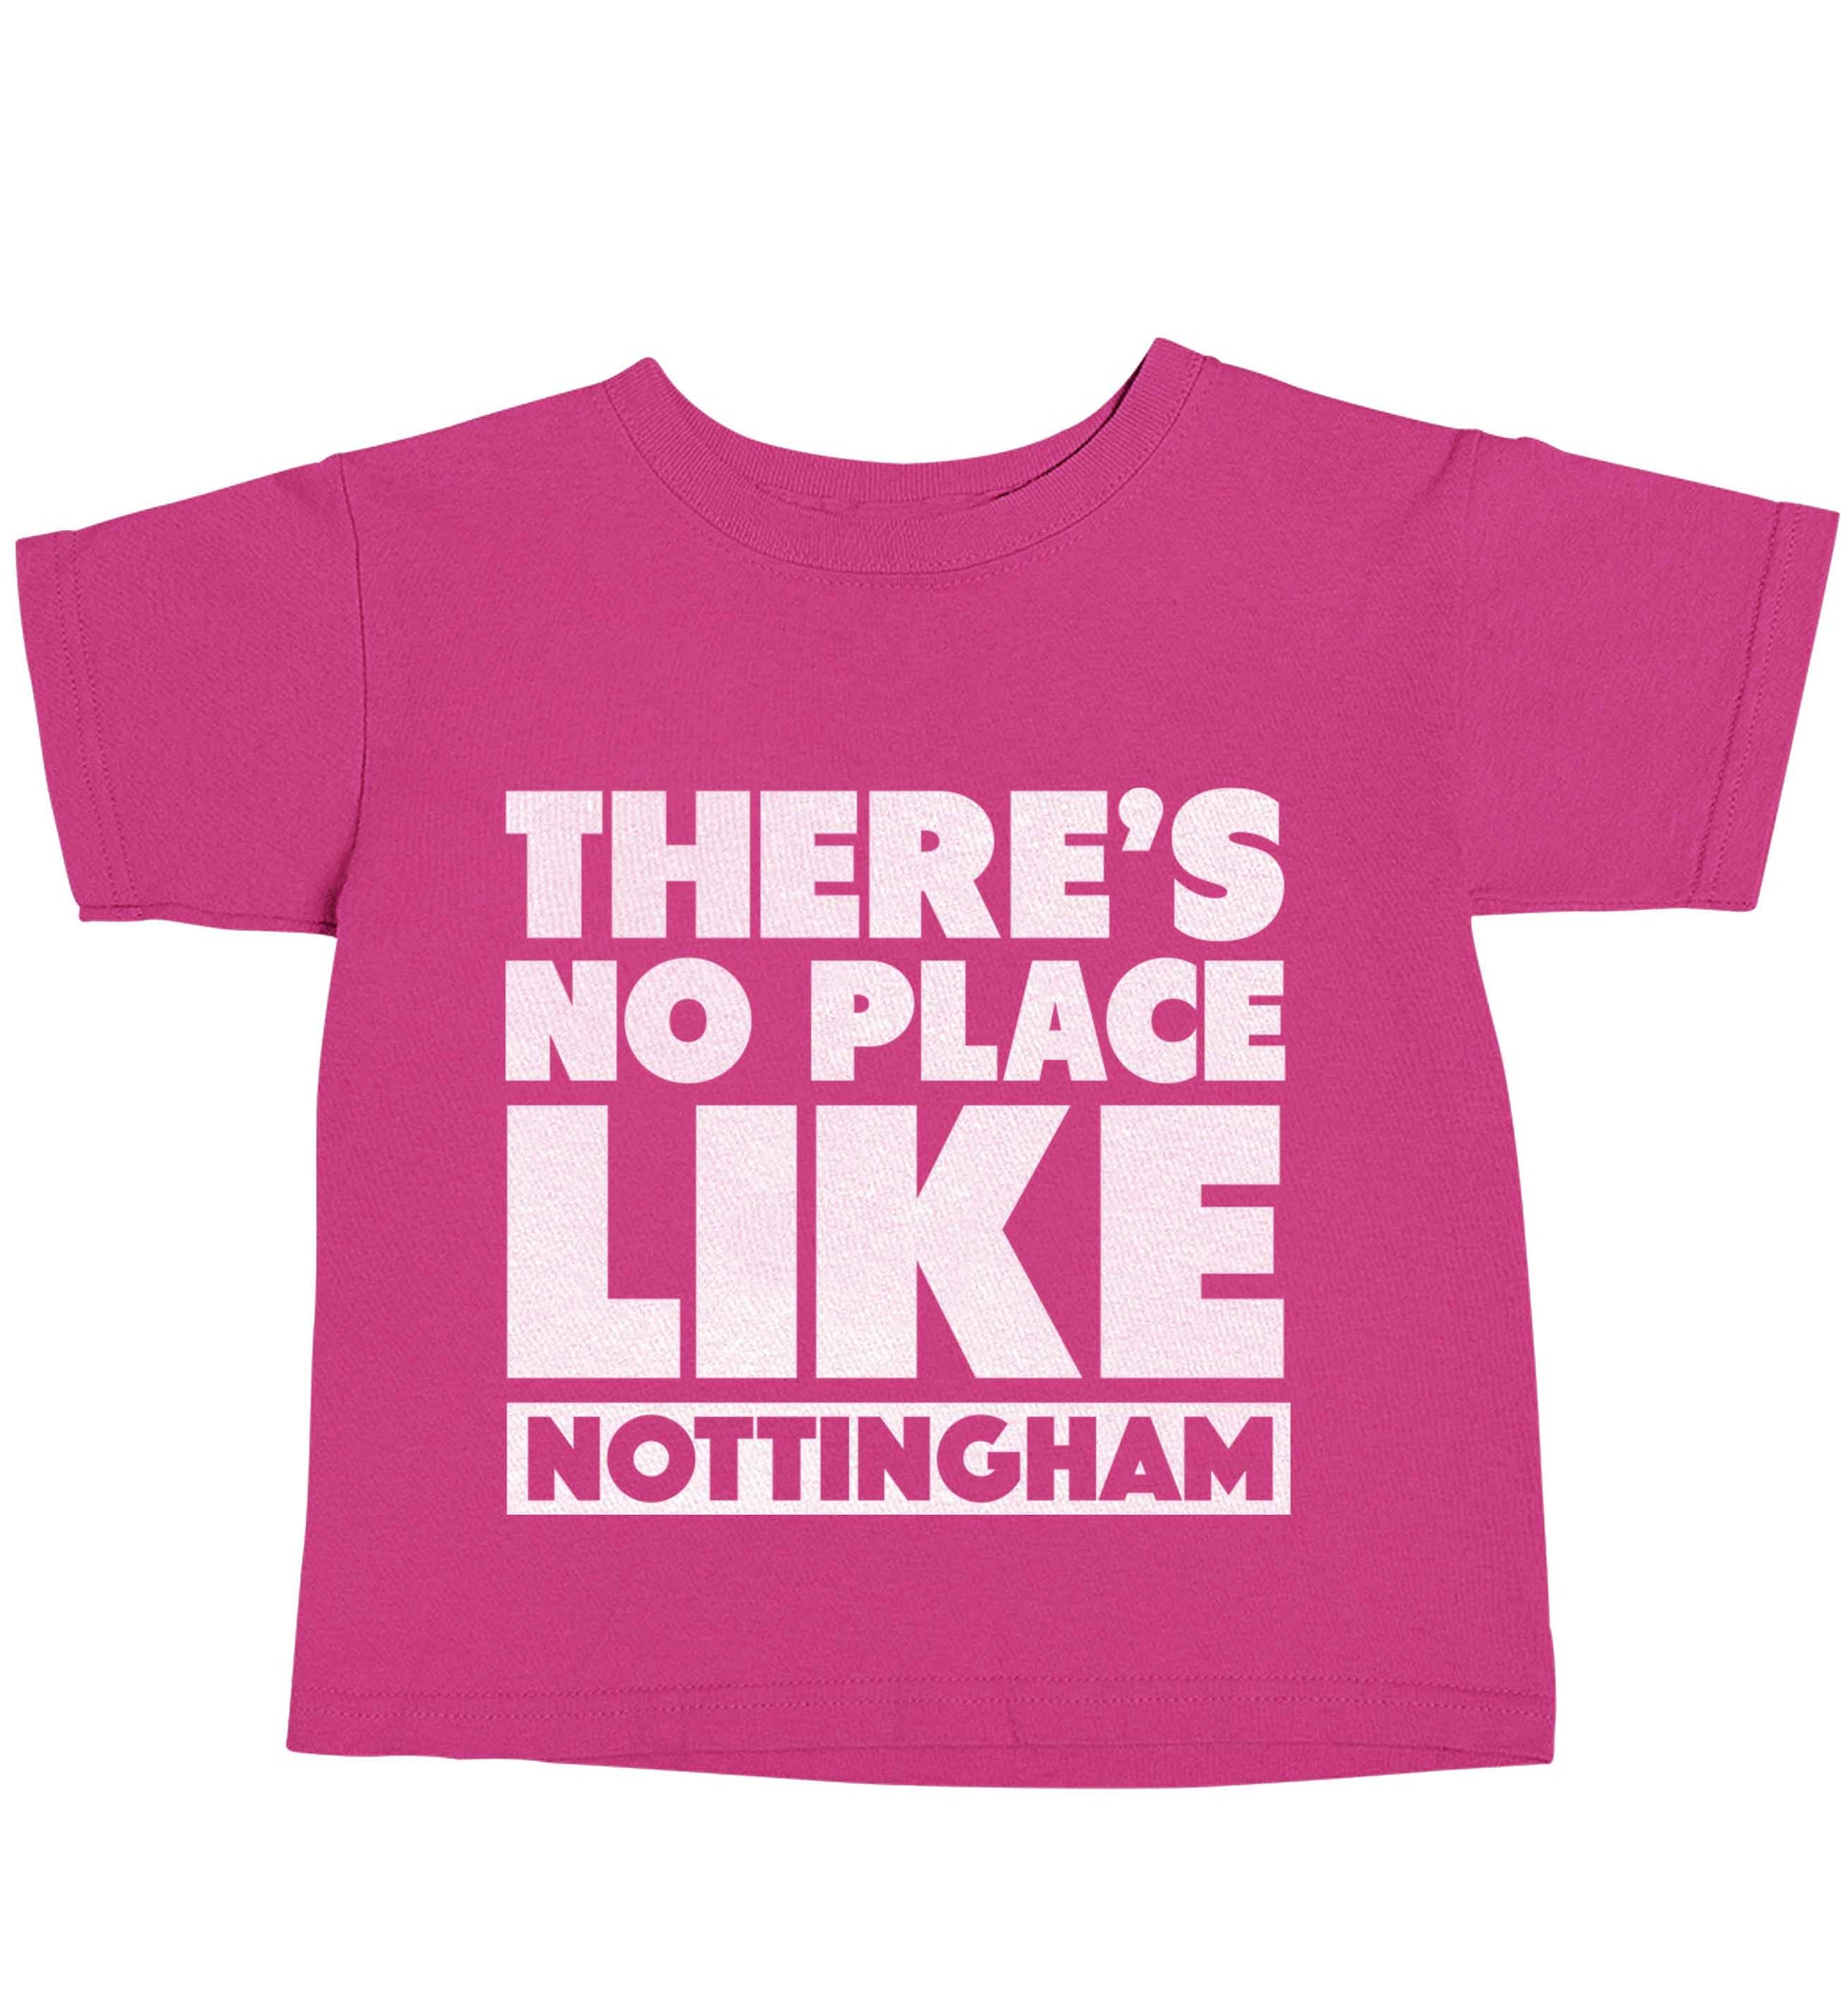 There's no place like Nottingham pink baby toddler Tshirt 2 Years